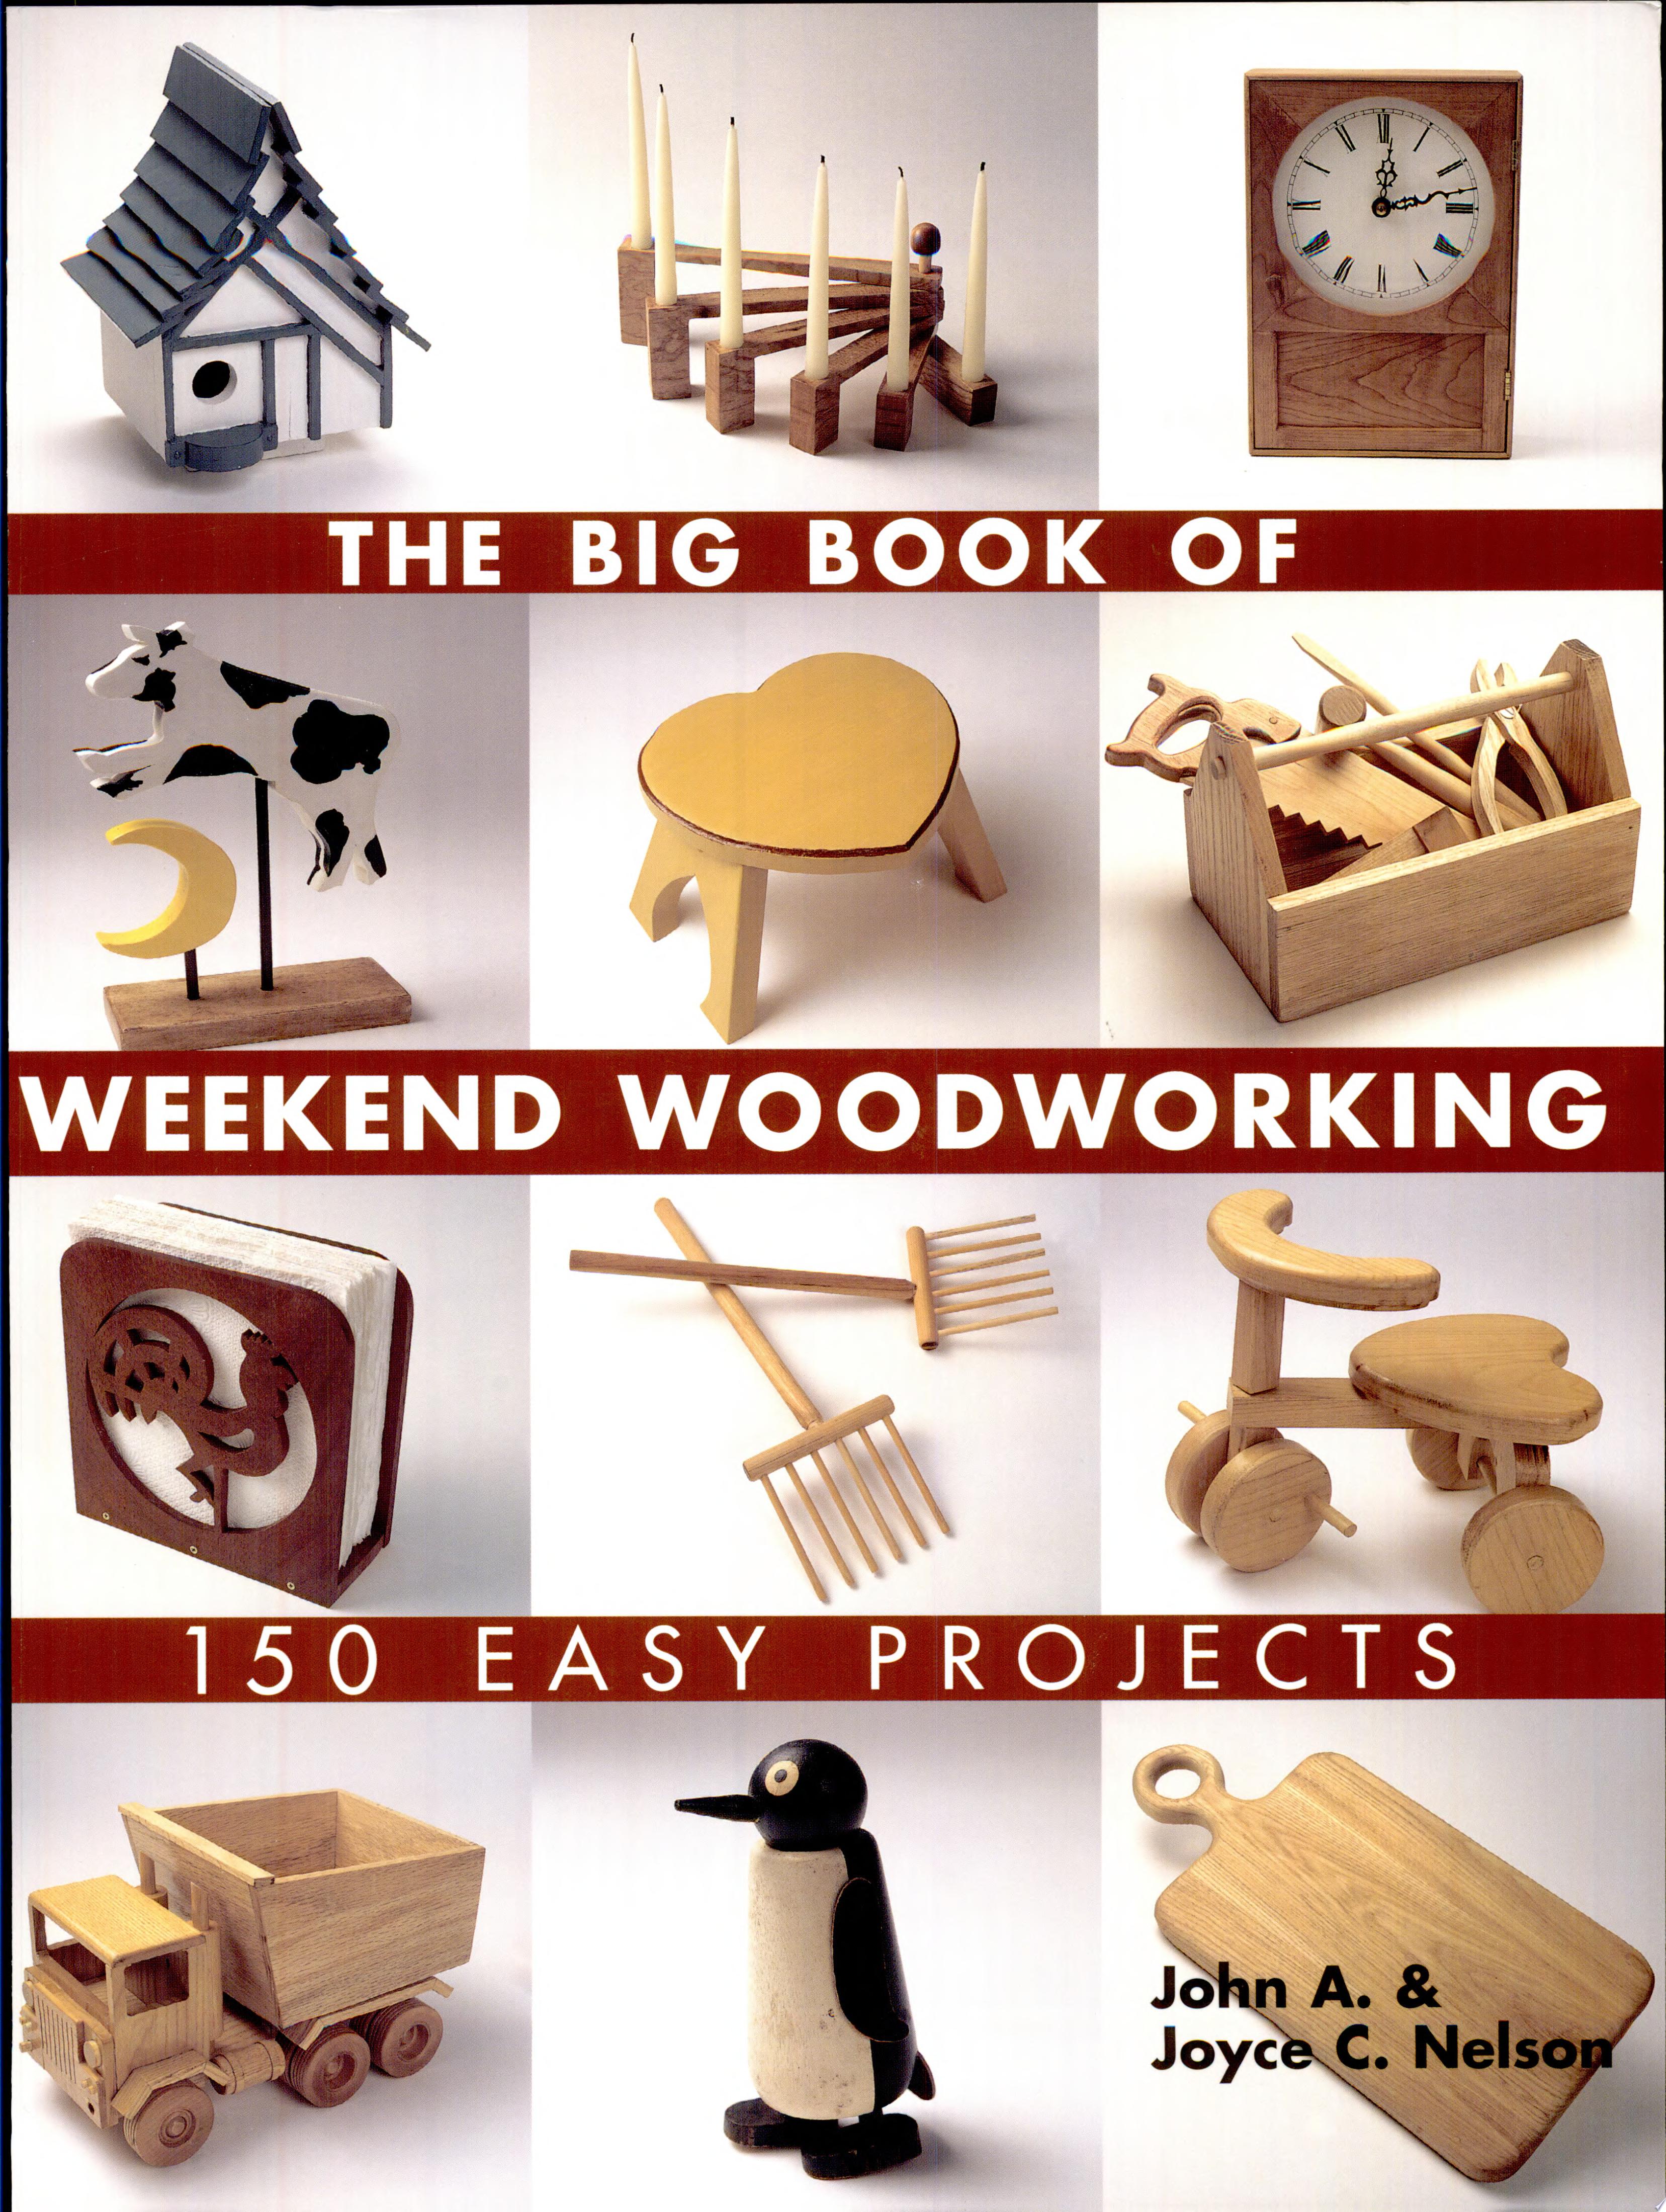 Image for "The Big Book of Weekend Woodworking"